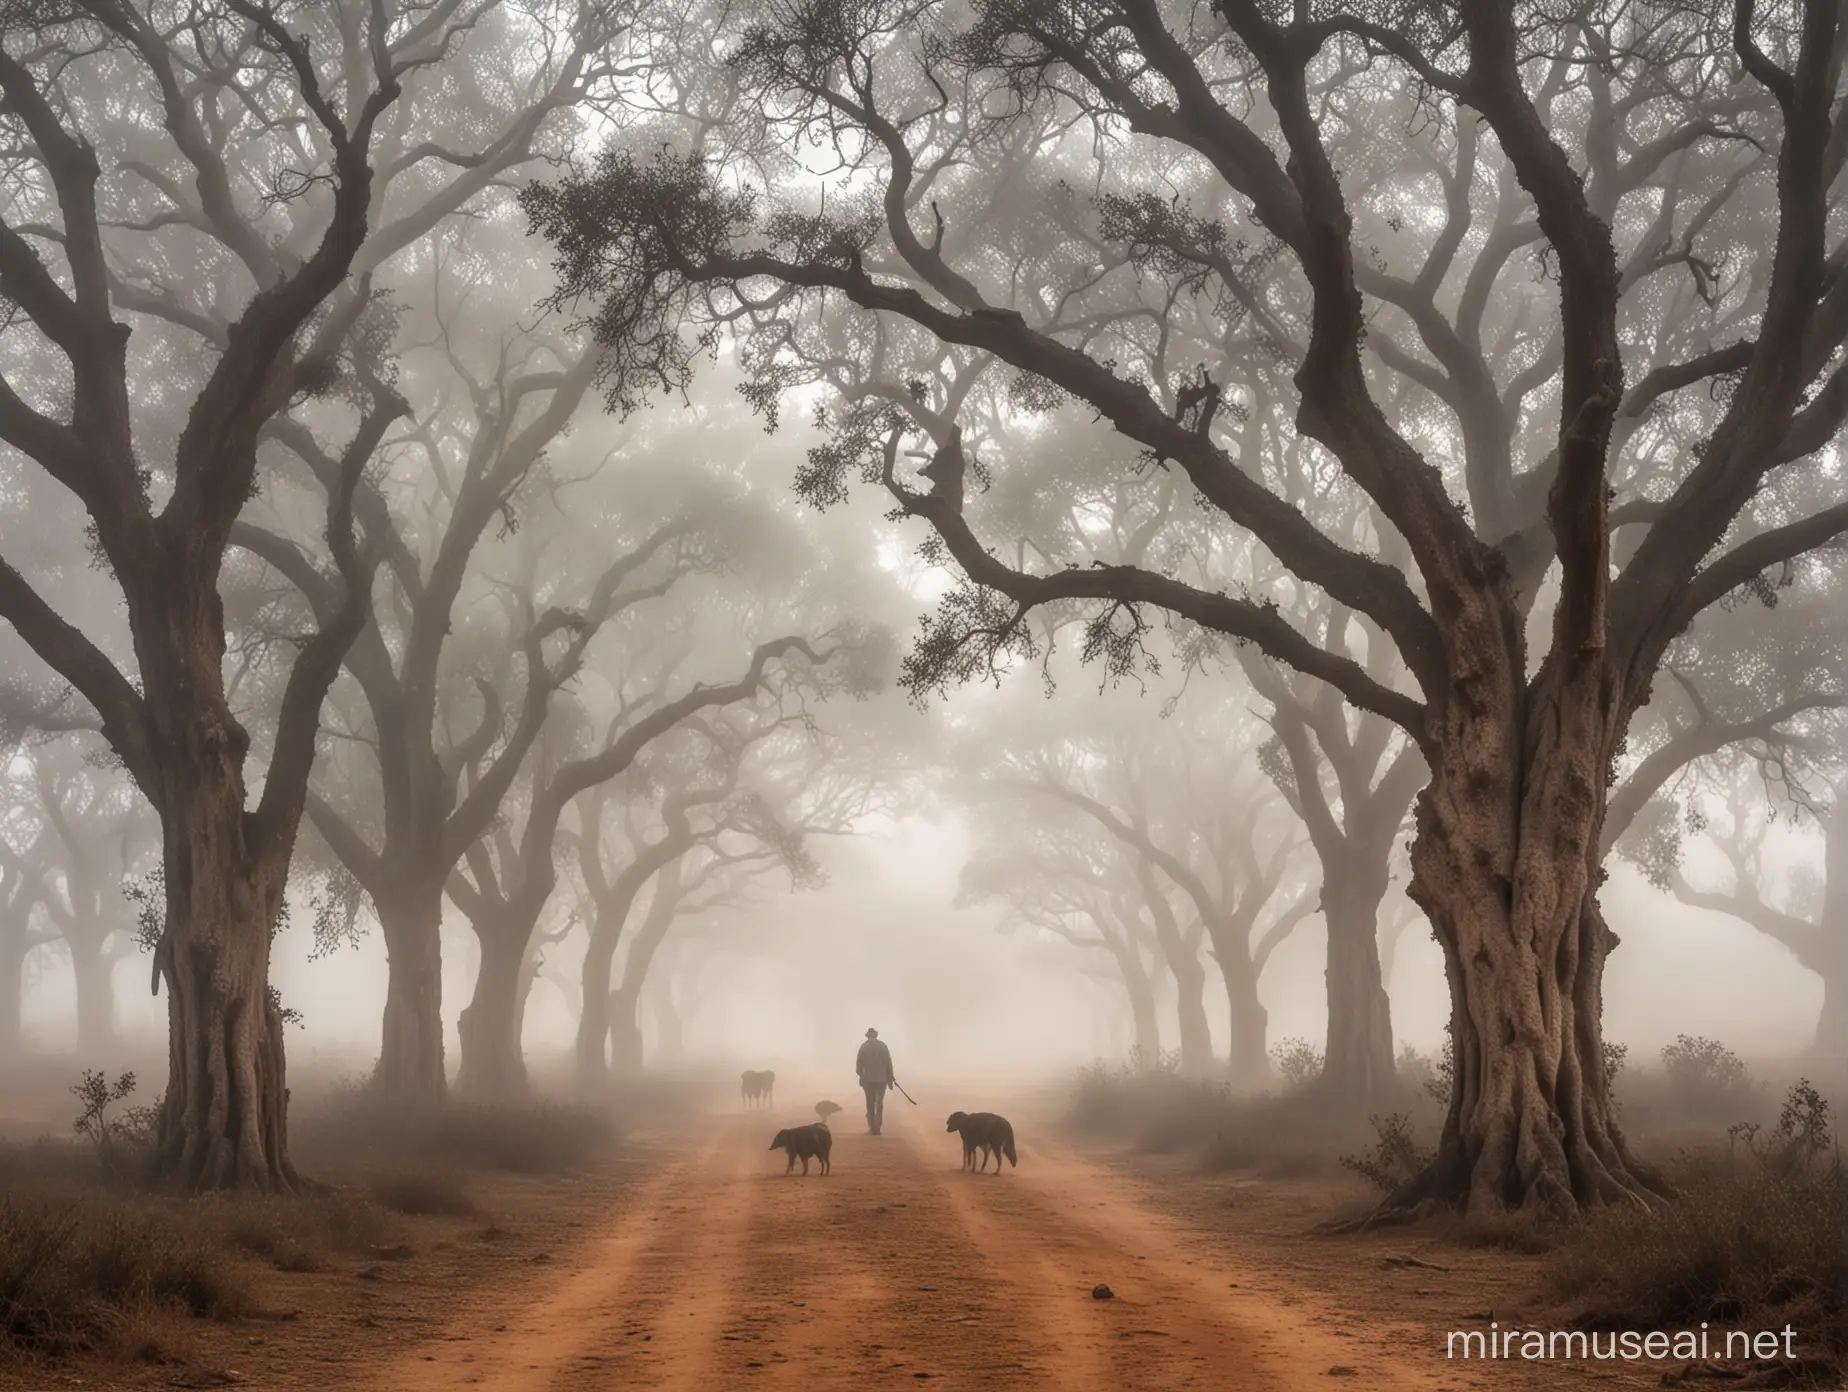 Mystical Cork Oak Trees Landscape with Man and Dog in Heavy Mist